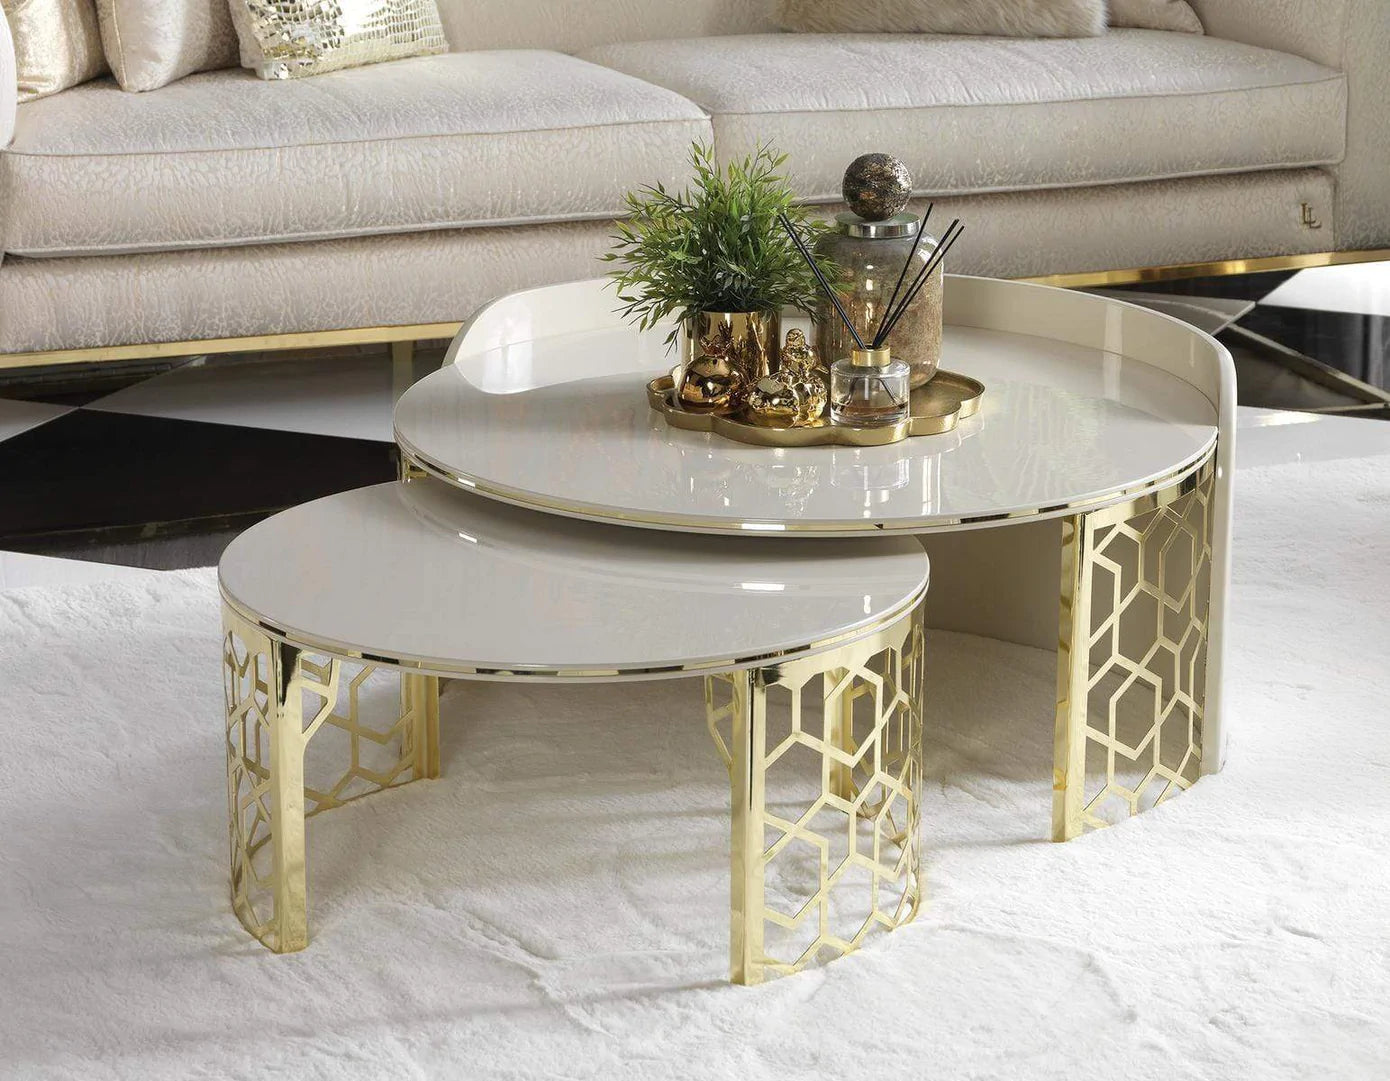 Let's Discover the Coffee Table Type You Are Looking For Together!